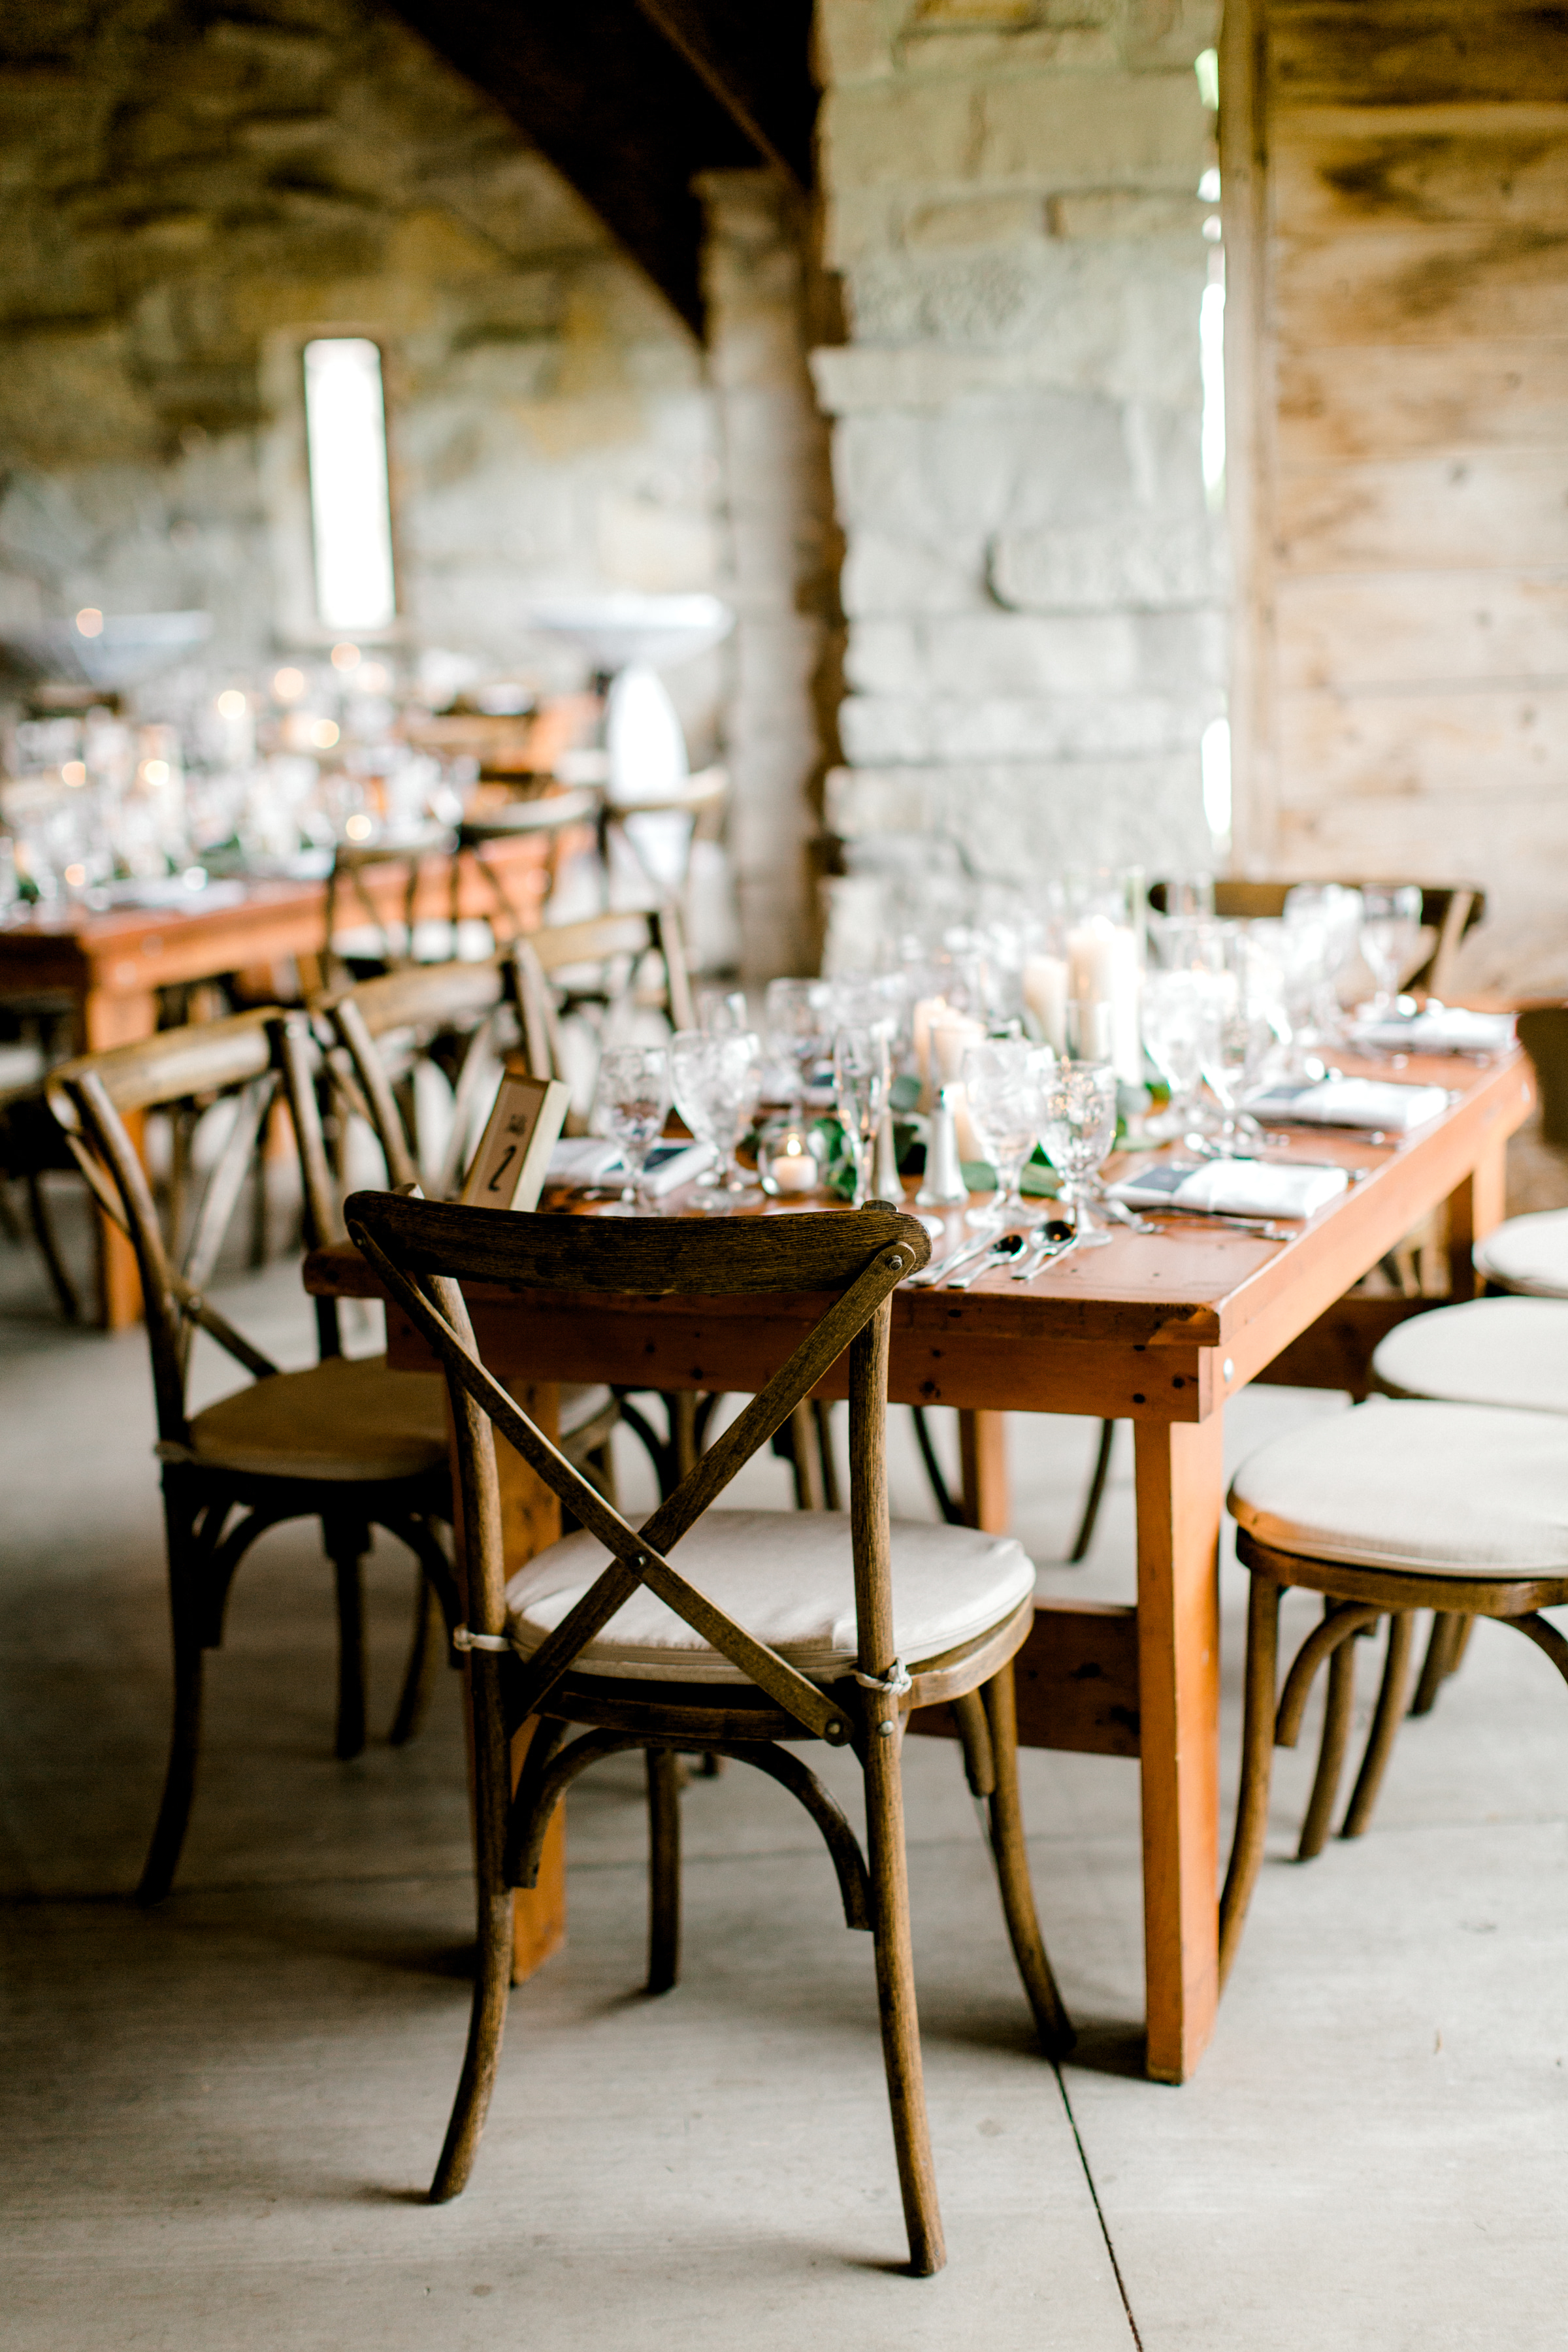 Chic Wedding Reception with Wood Tables